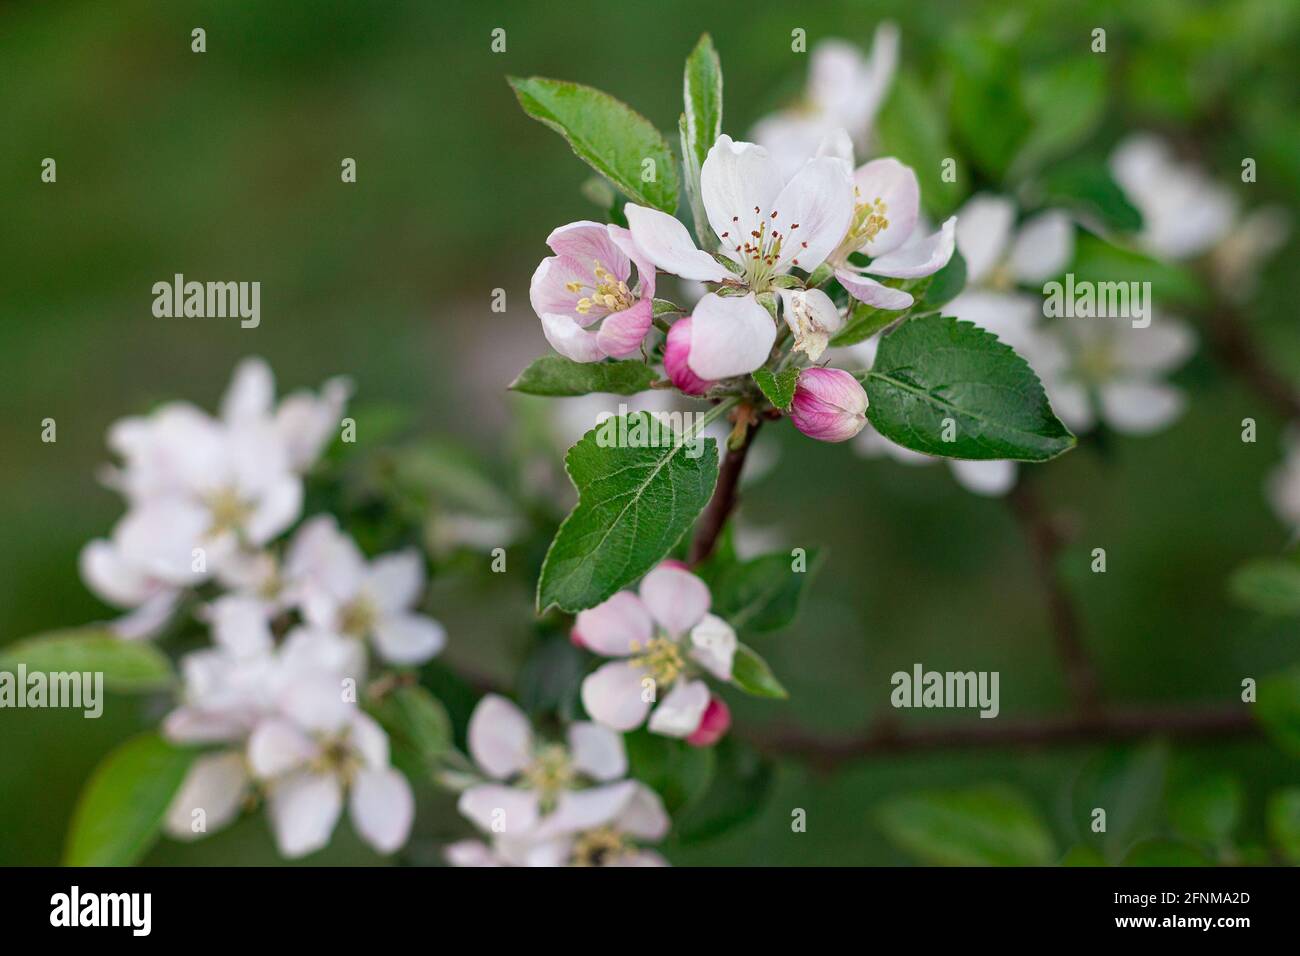 Blossoming branch of apple tree, blurry background. May flowering fruit tree. White-pink flowers. Stock Photo